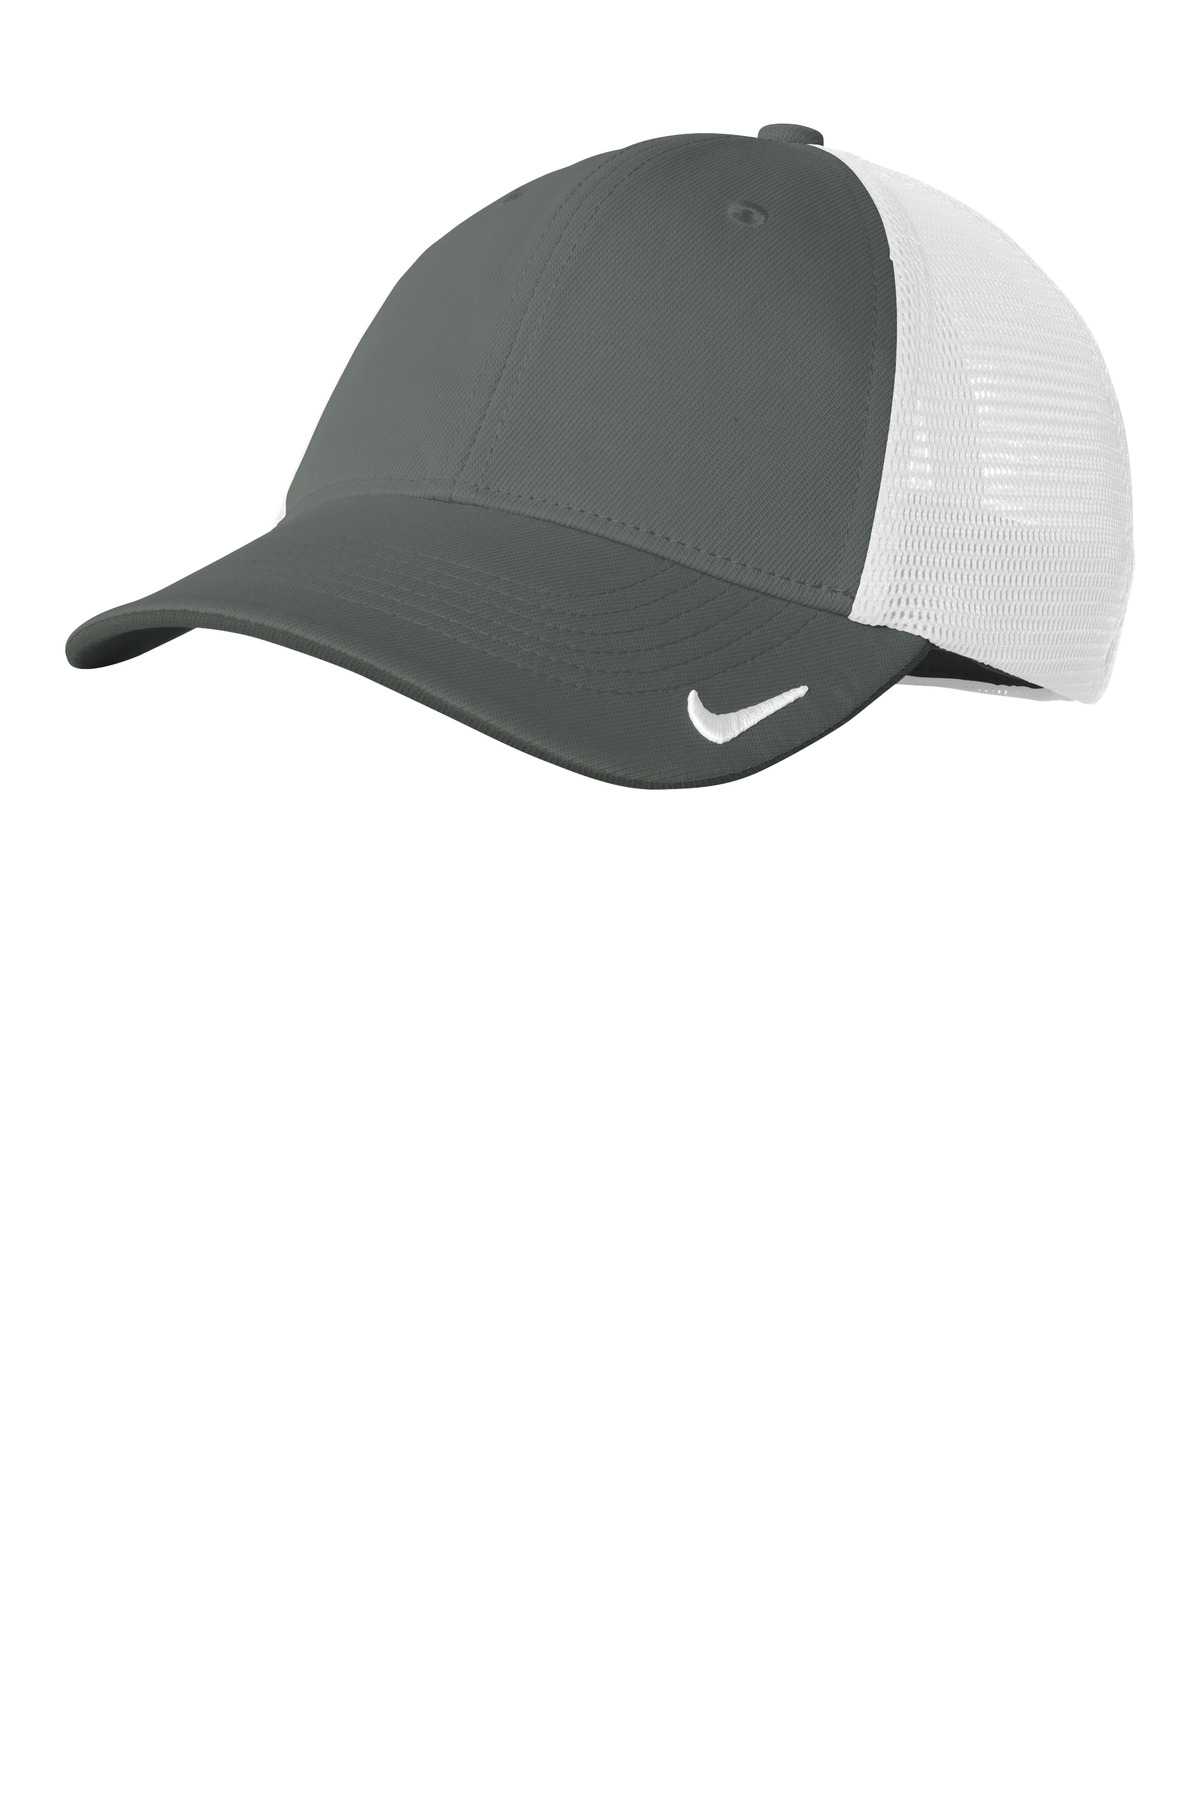 Nike Stretch-to-Fit Mesh Back Cap-